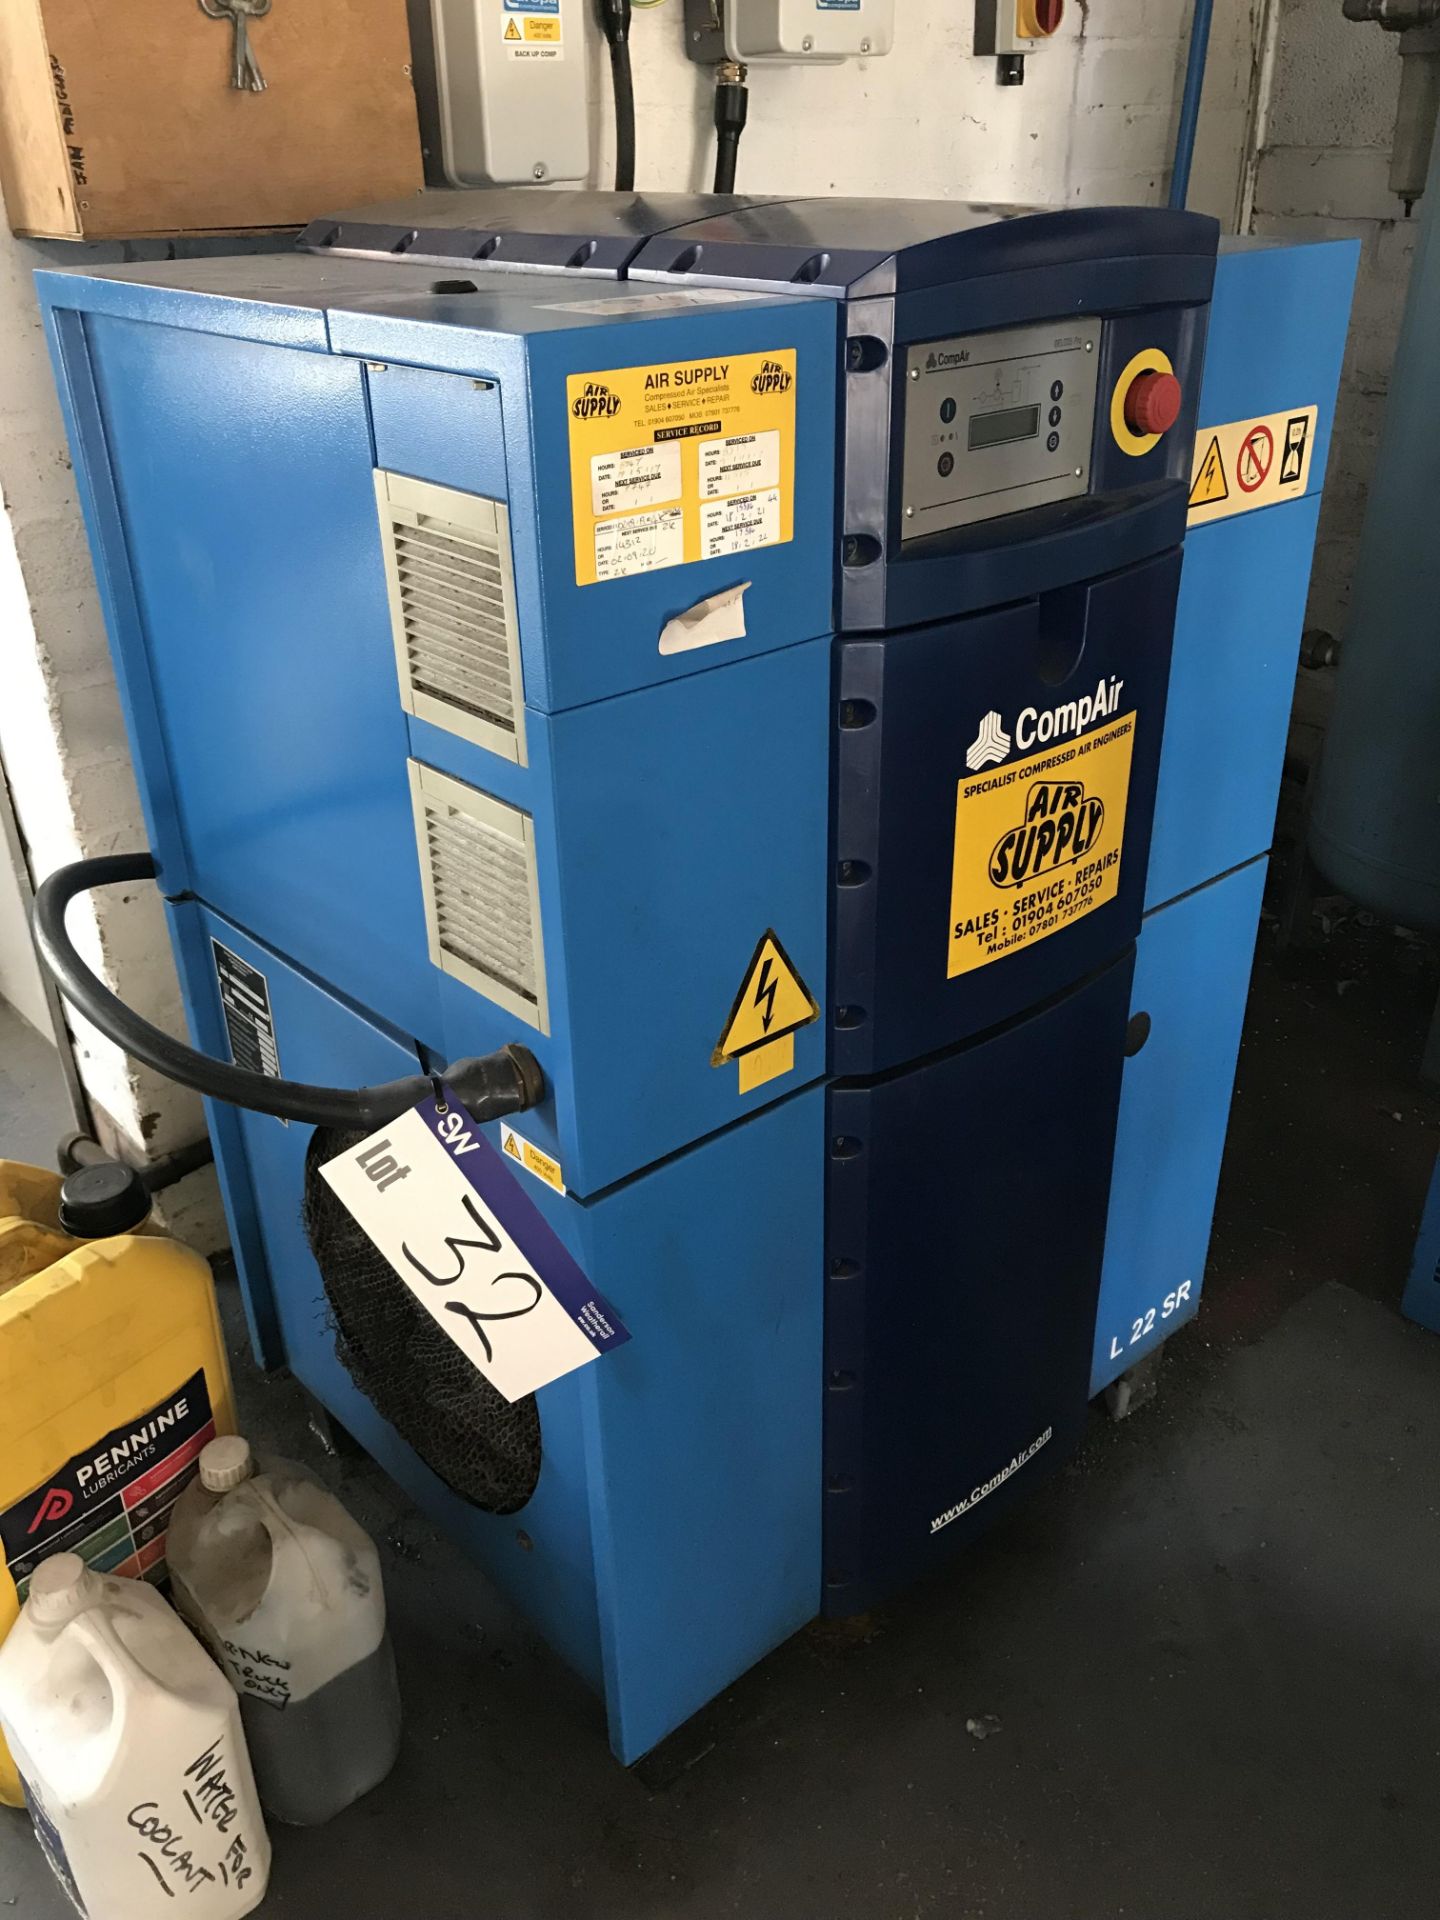 Compair L22 SR-7.5A Rotary Screw Air Compressor, serial no. 100016086/0001, year of manufacture